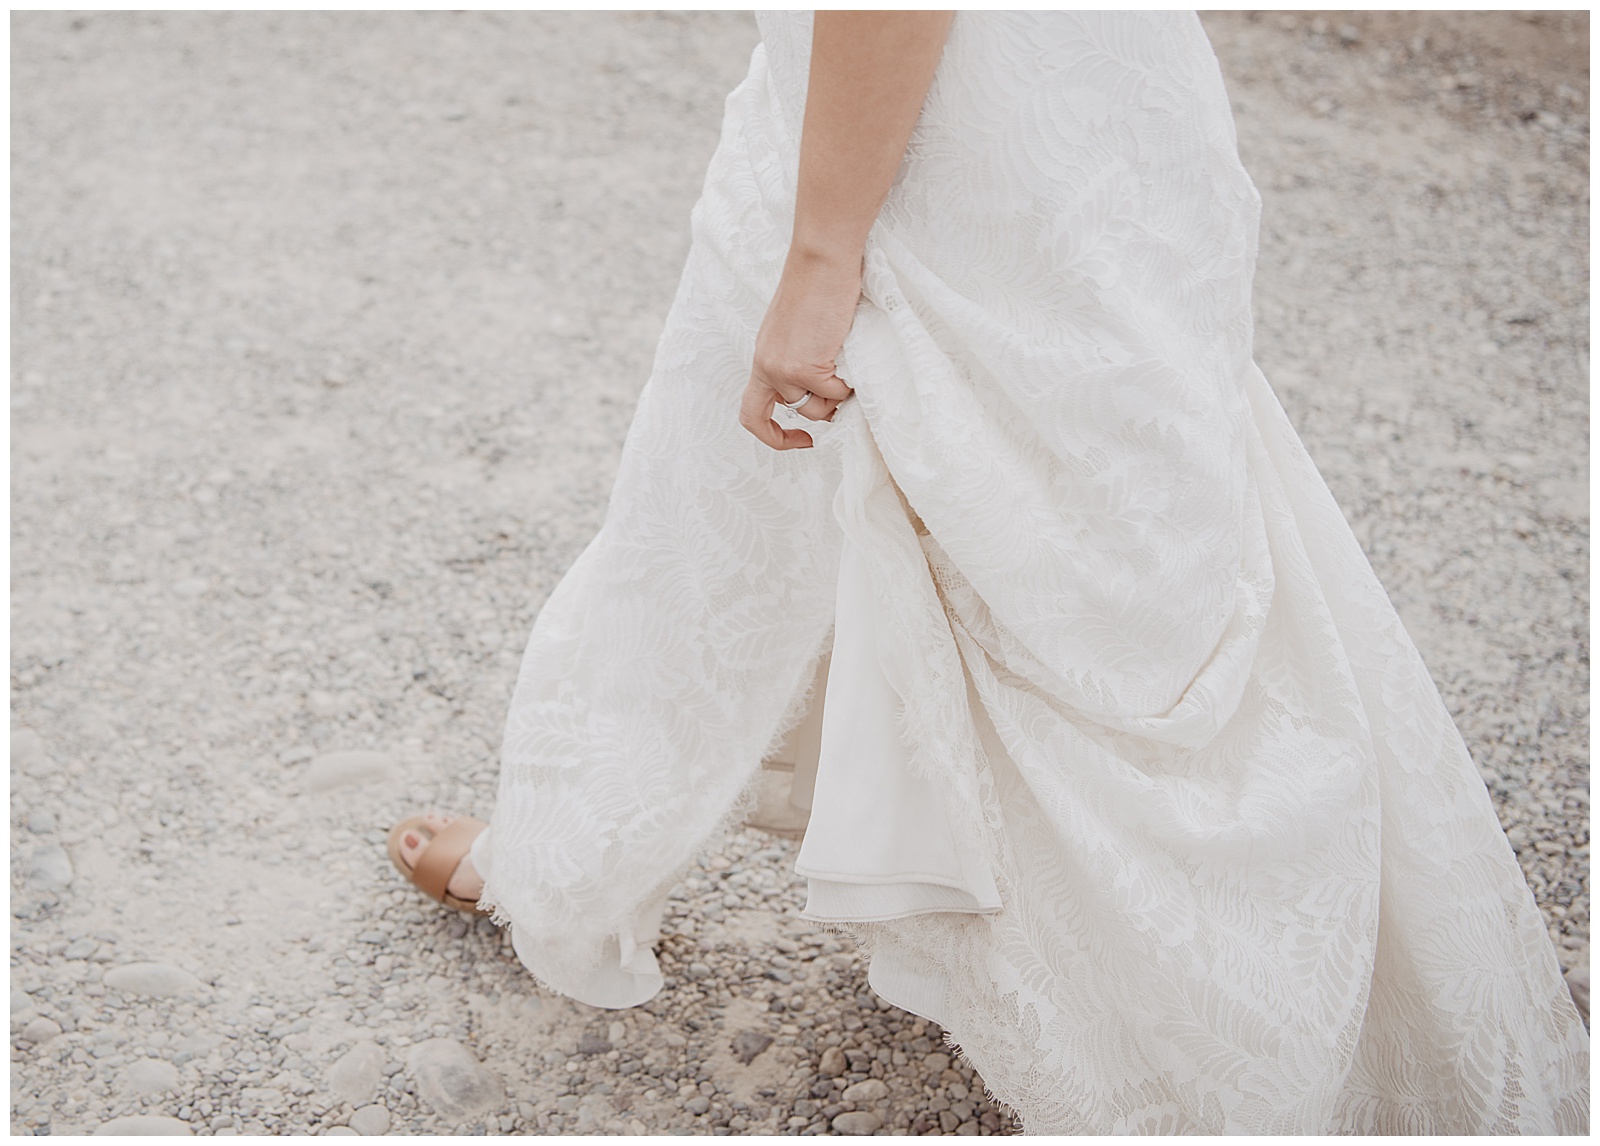 detail shot of the bride walking while holding up her lace gown so that it doesn't drag on the gravel floor in the Tetons